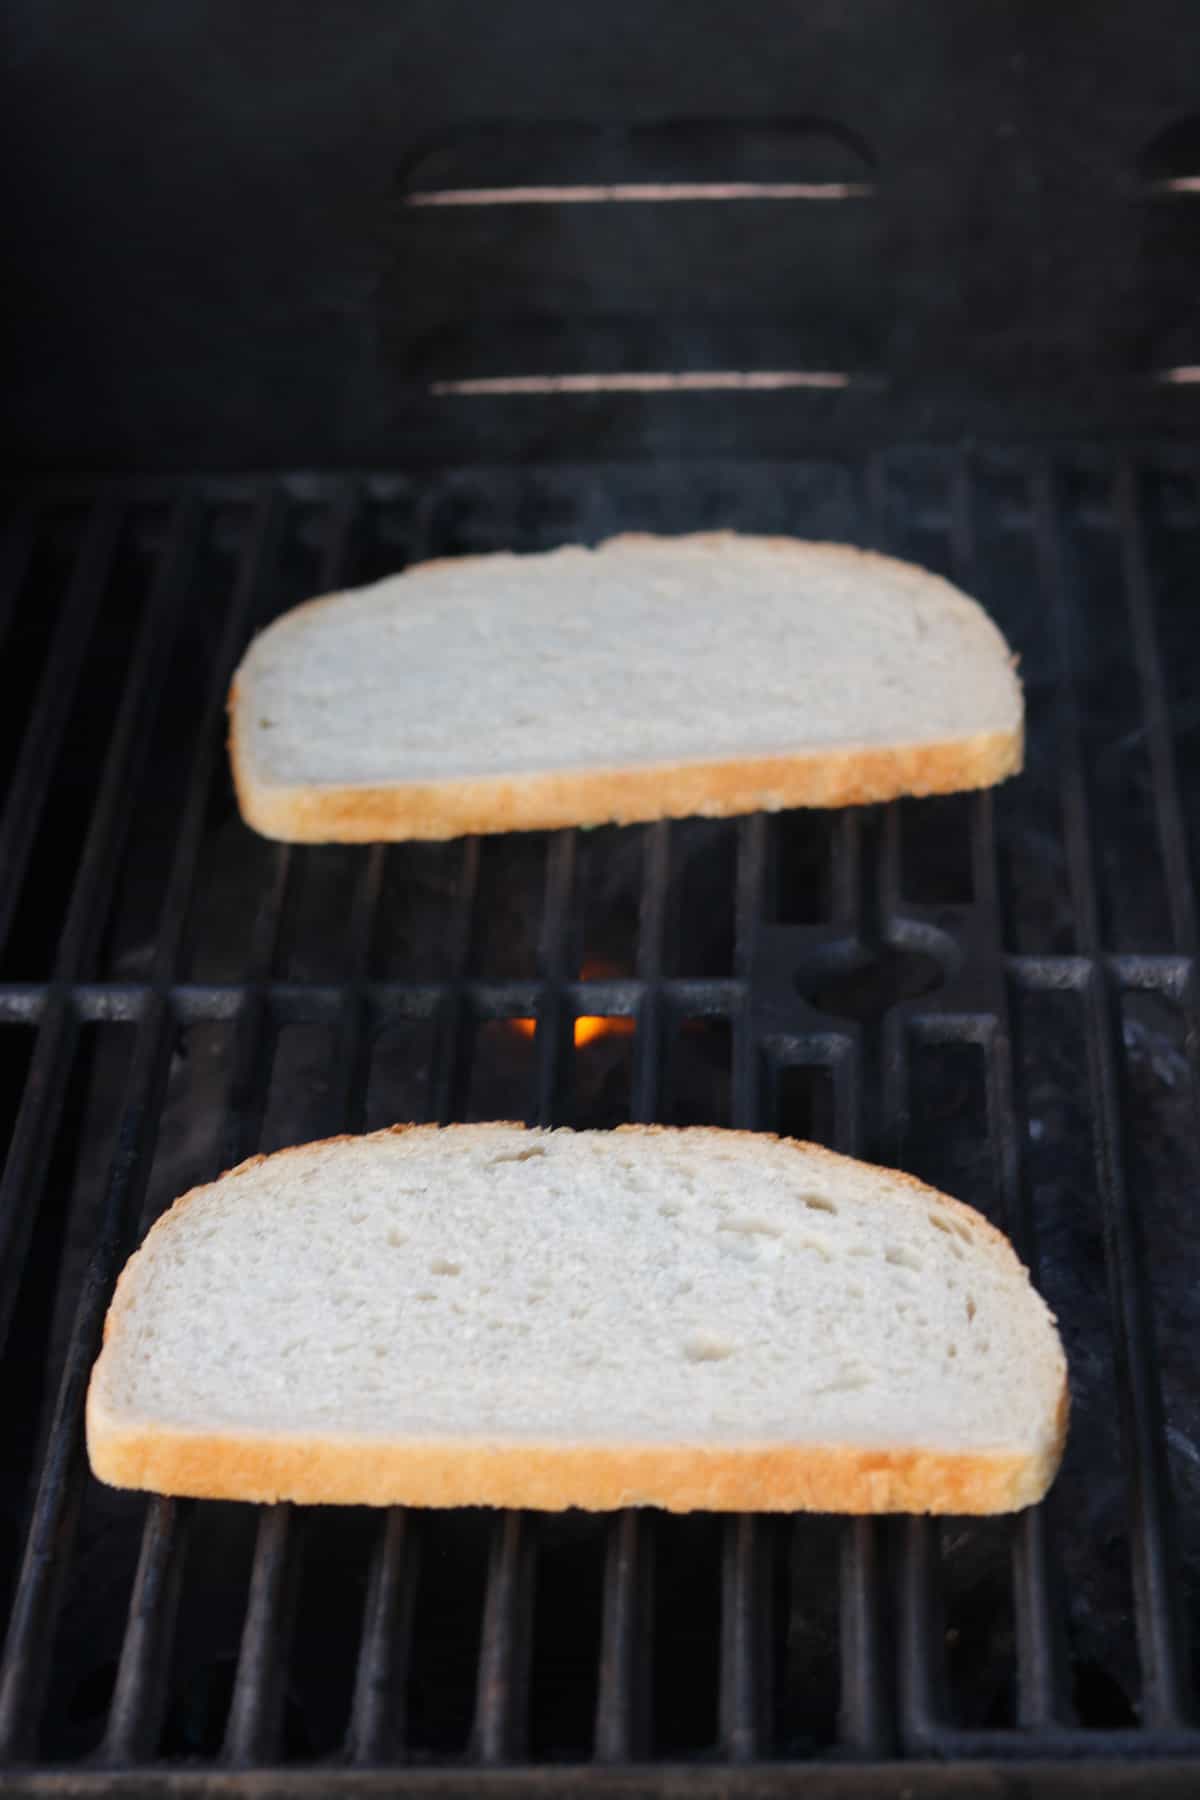 untoasted bread on a grill.